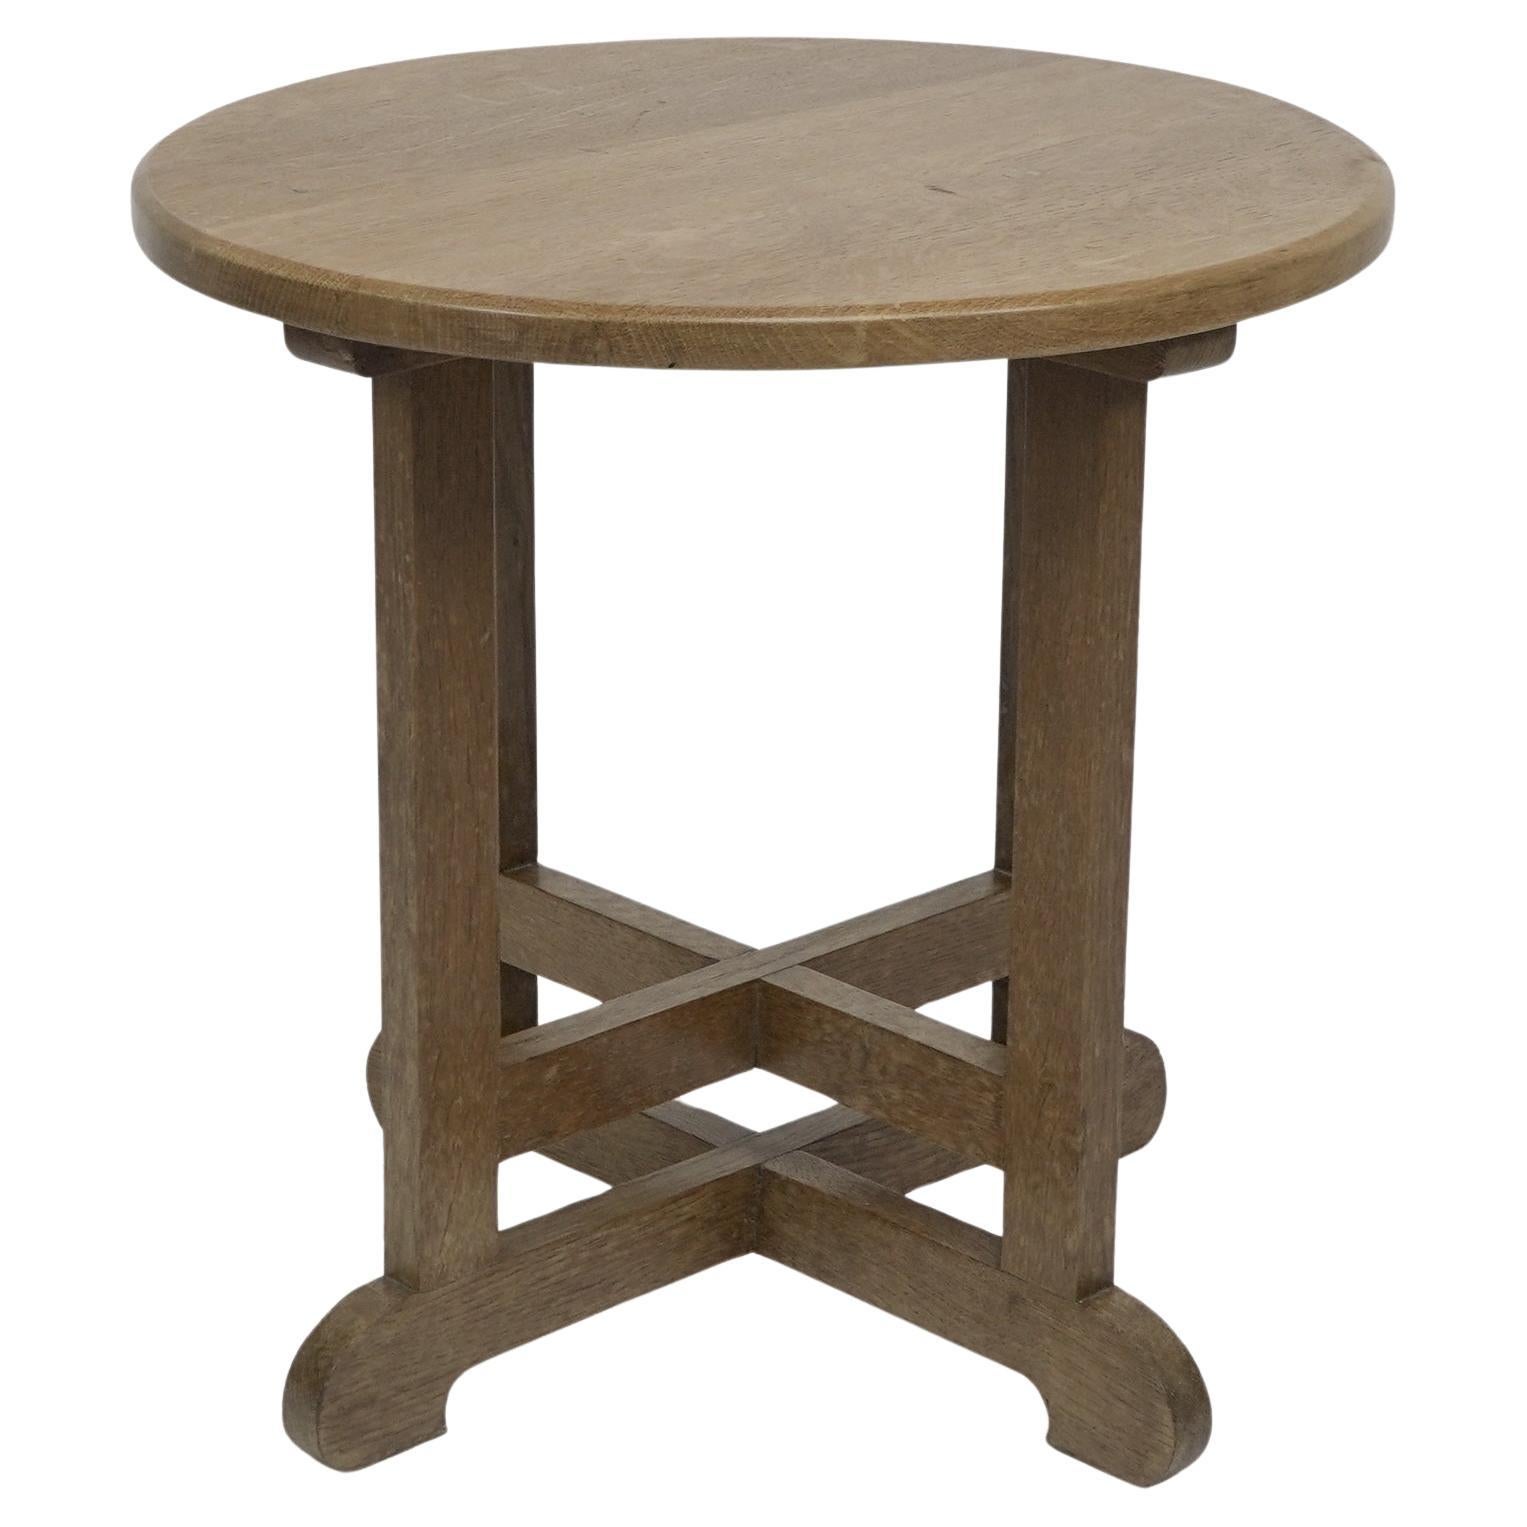 Heals of London in the style of. An oak circular oak side or occasional table.